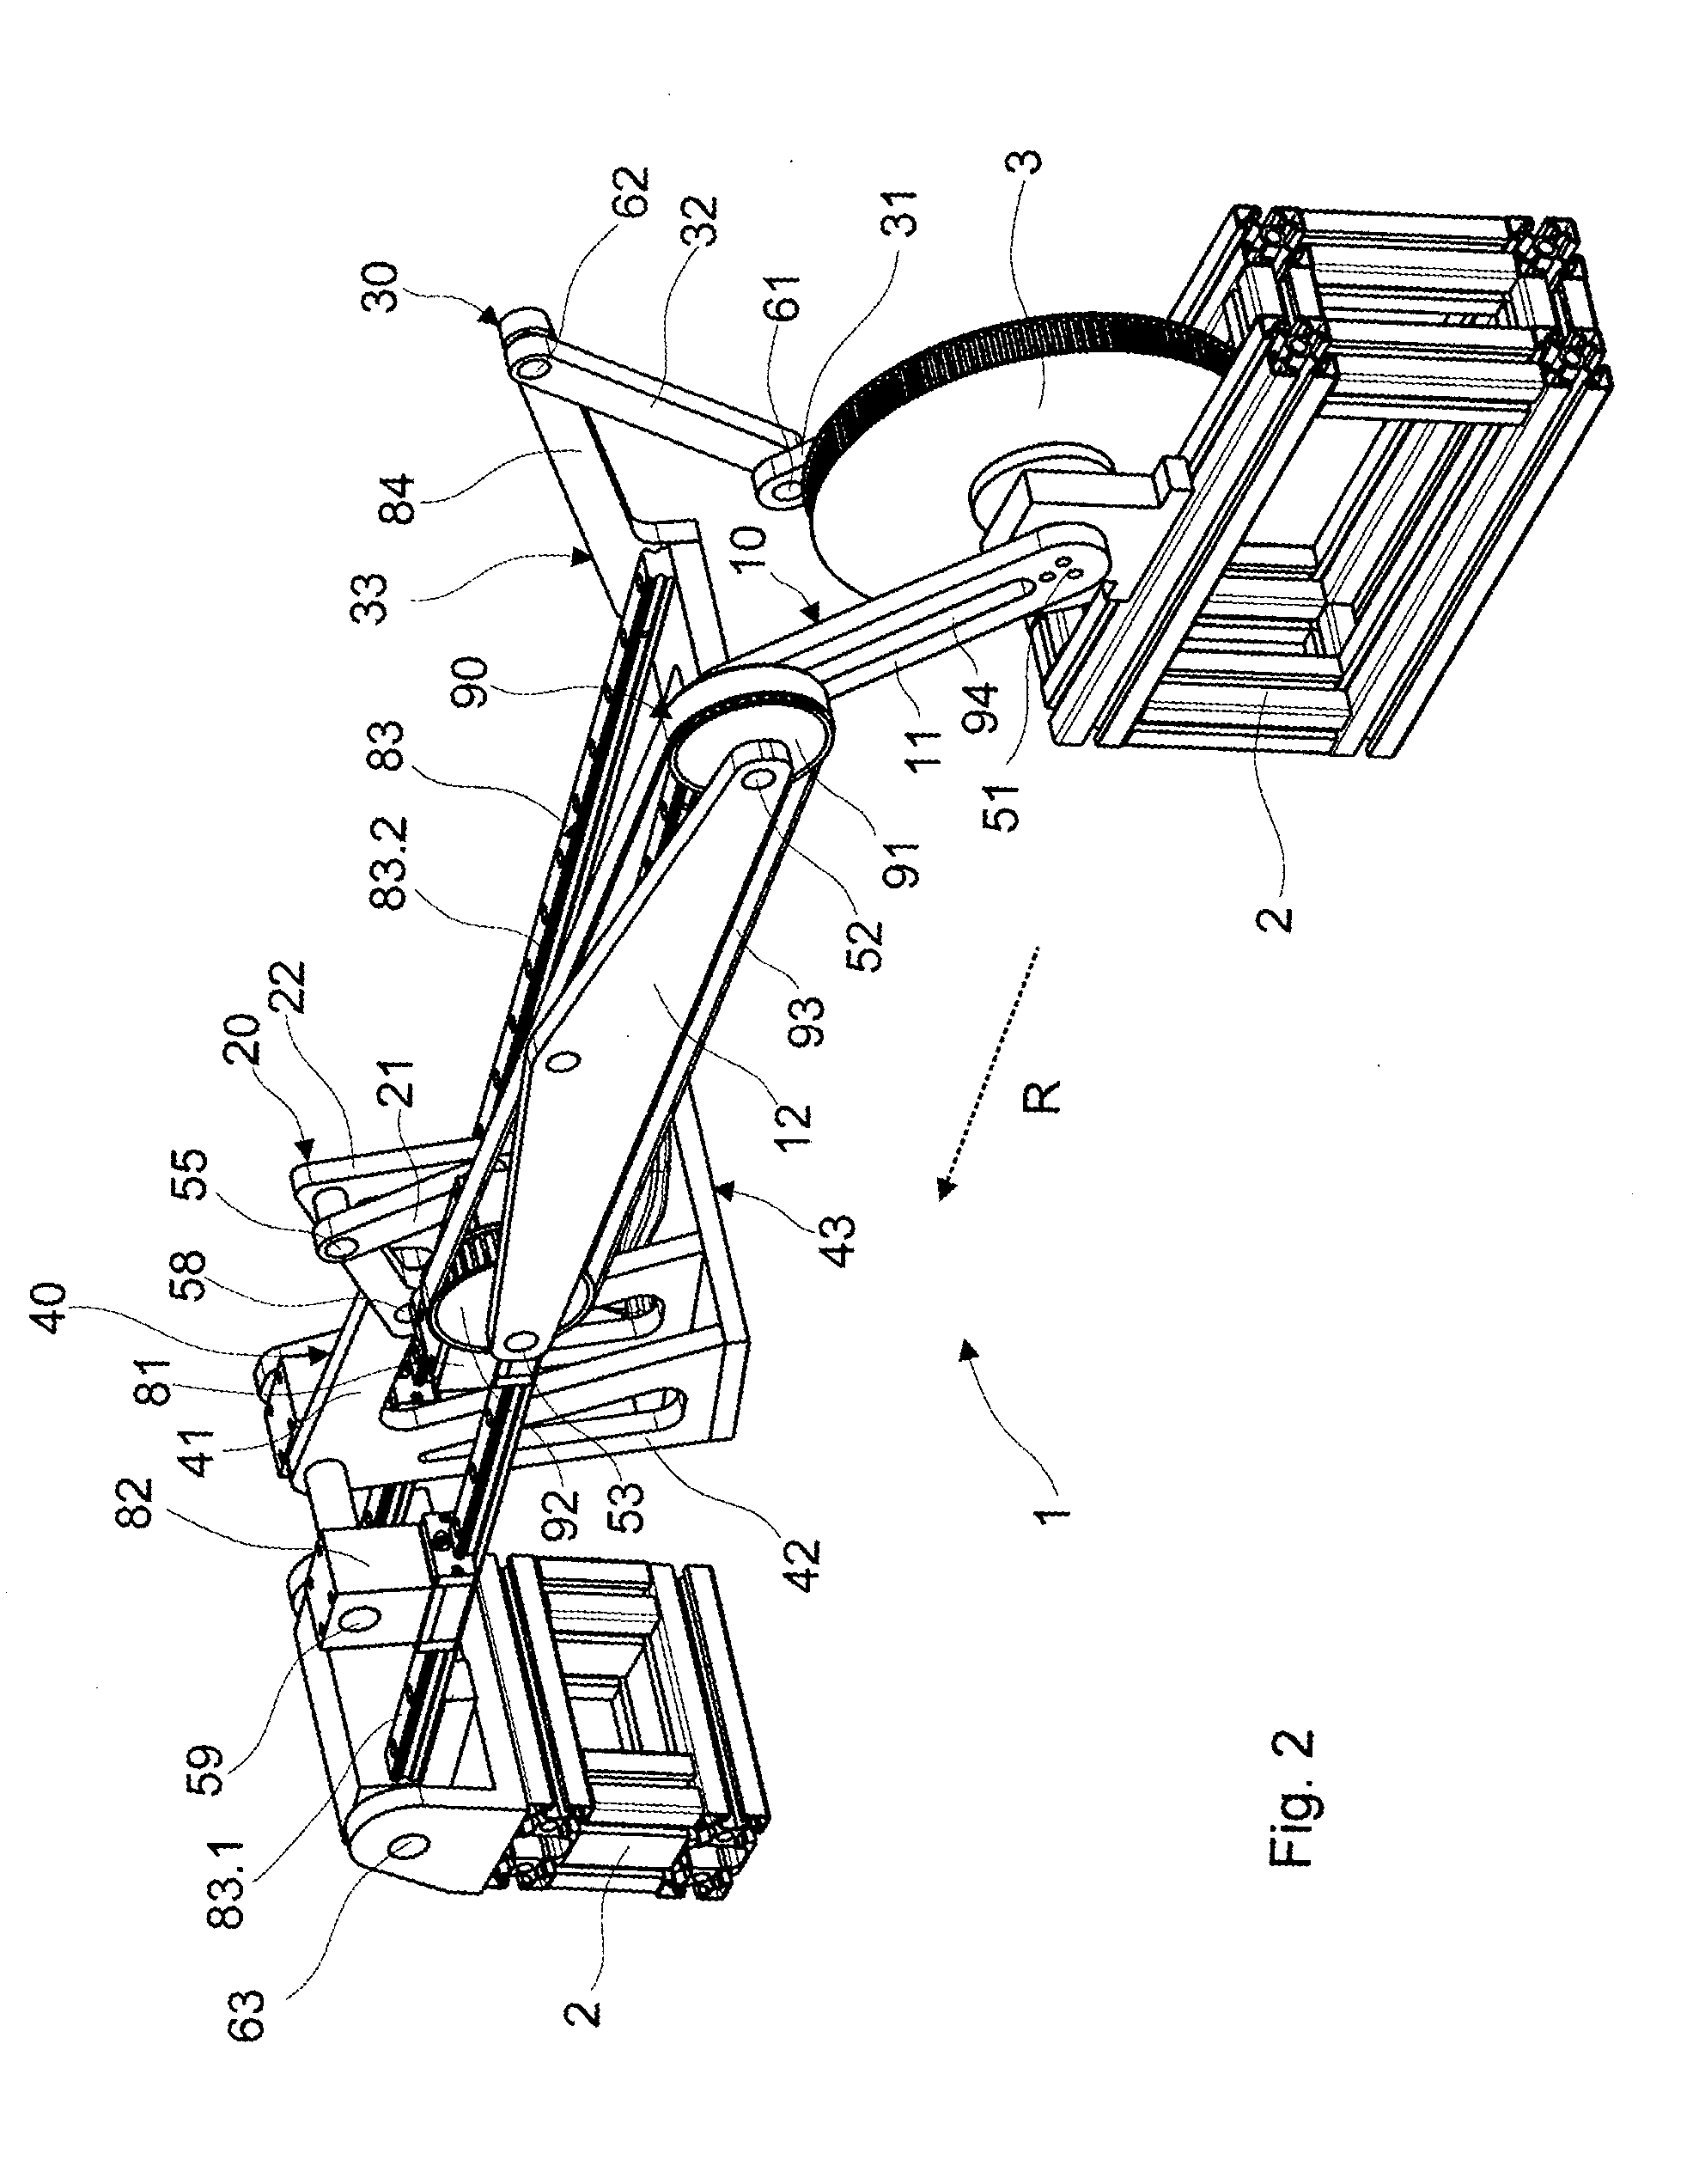 Gait training apparatus for generating a natural gait pattern